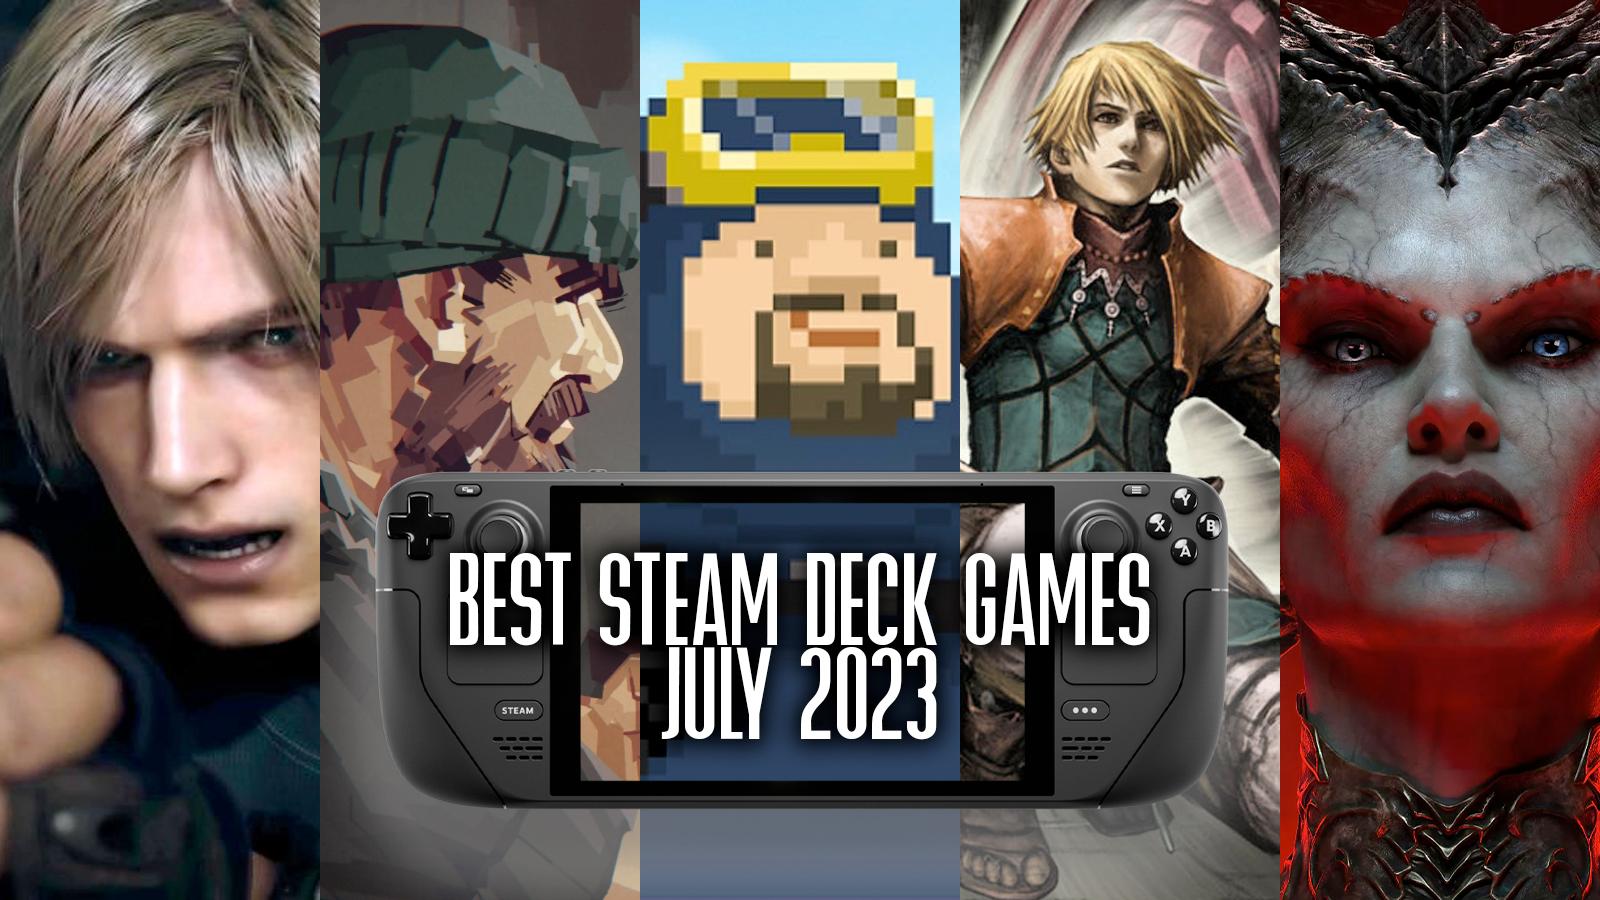 Best Steam Deck games July 2023, features Leon from RE4, Fisherman from Dredge, Dave the Diver, Xanadu Next and Lilith from Diablo 4